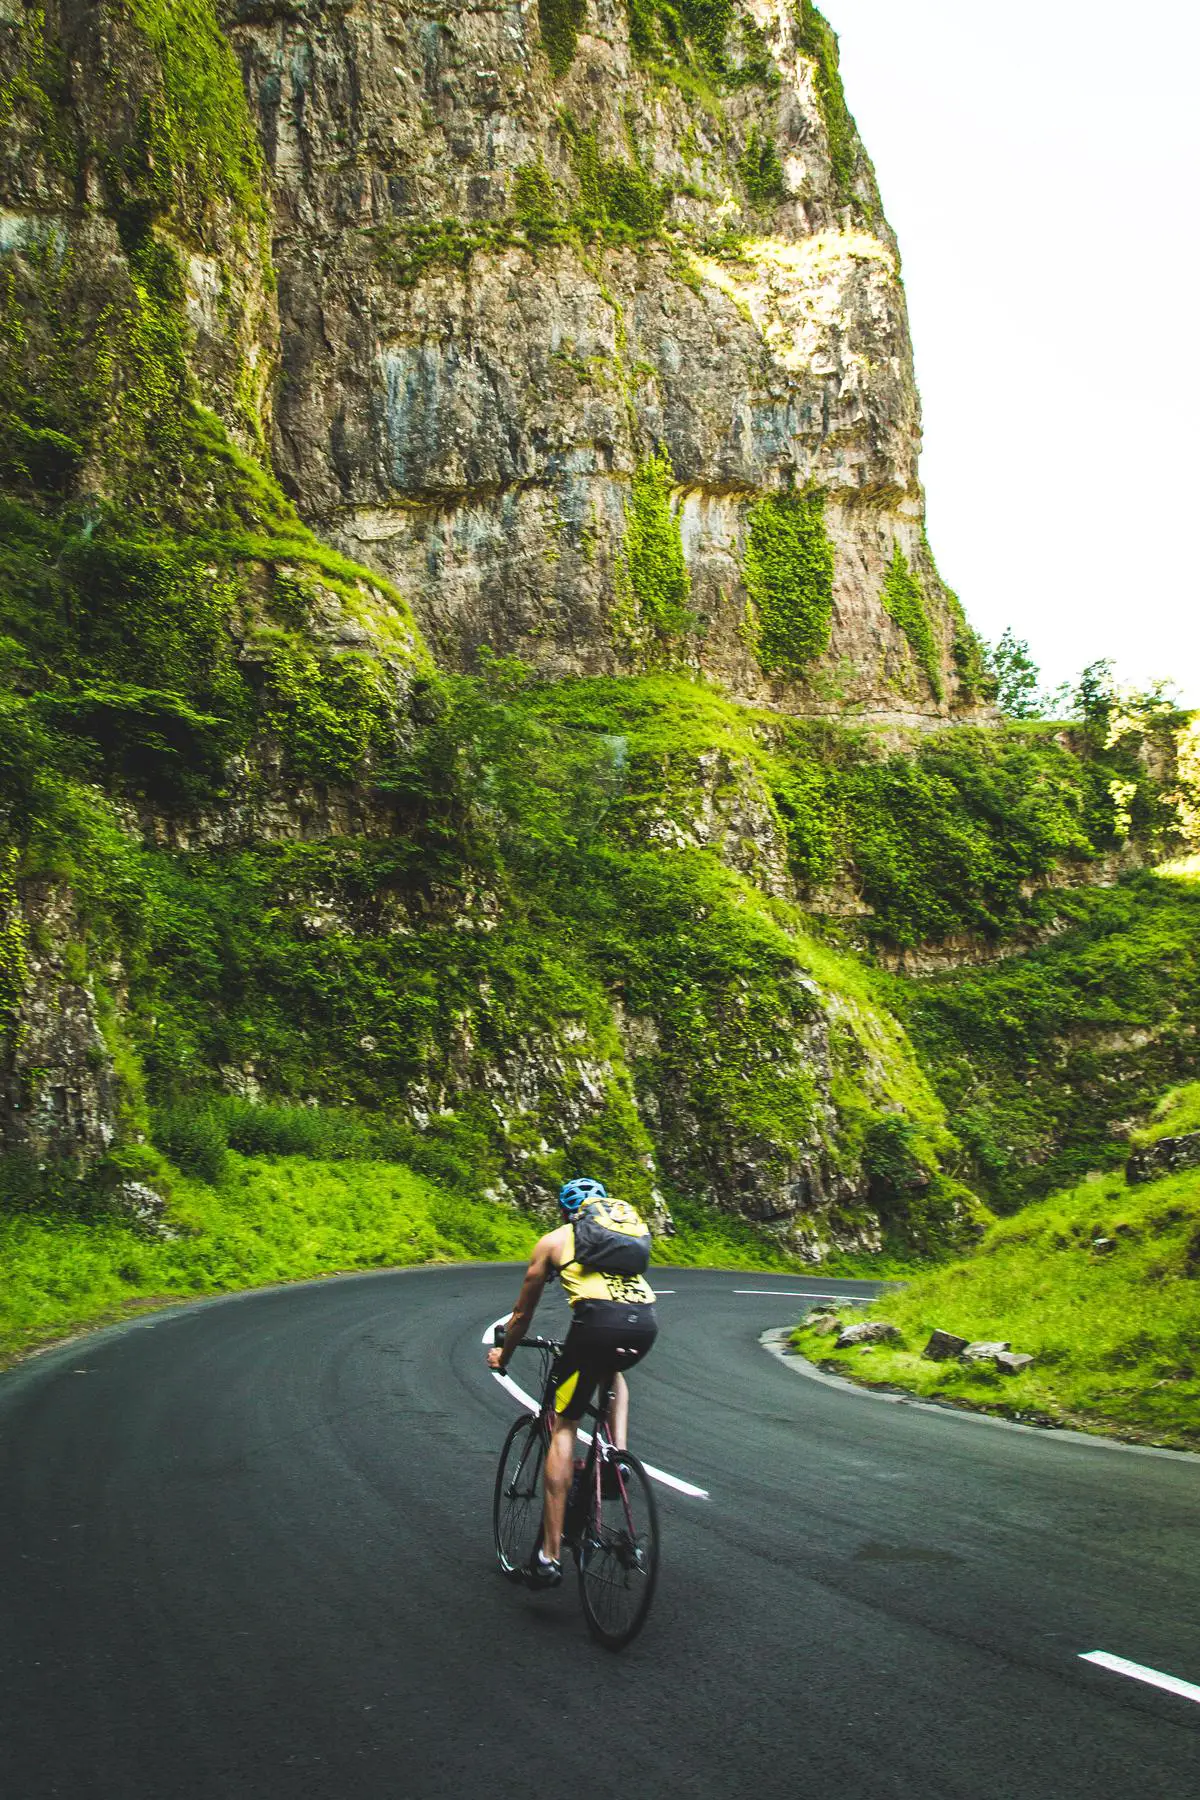 A person on a bike with a worried look on their face, looking up towards a steep hill and the open sky above.